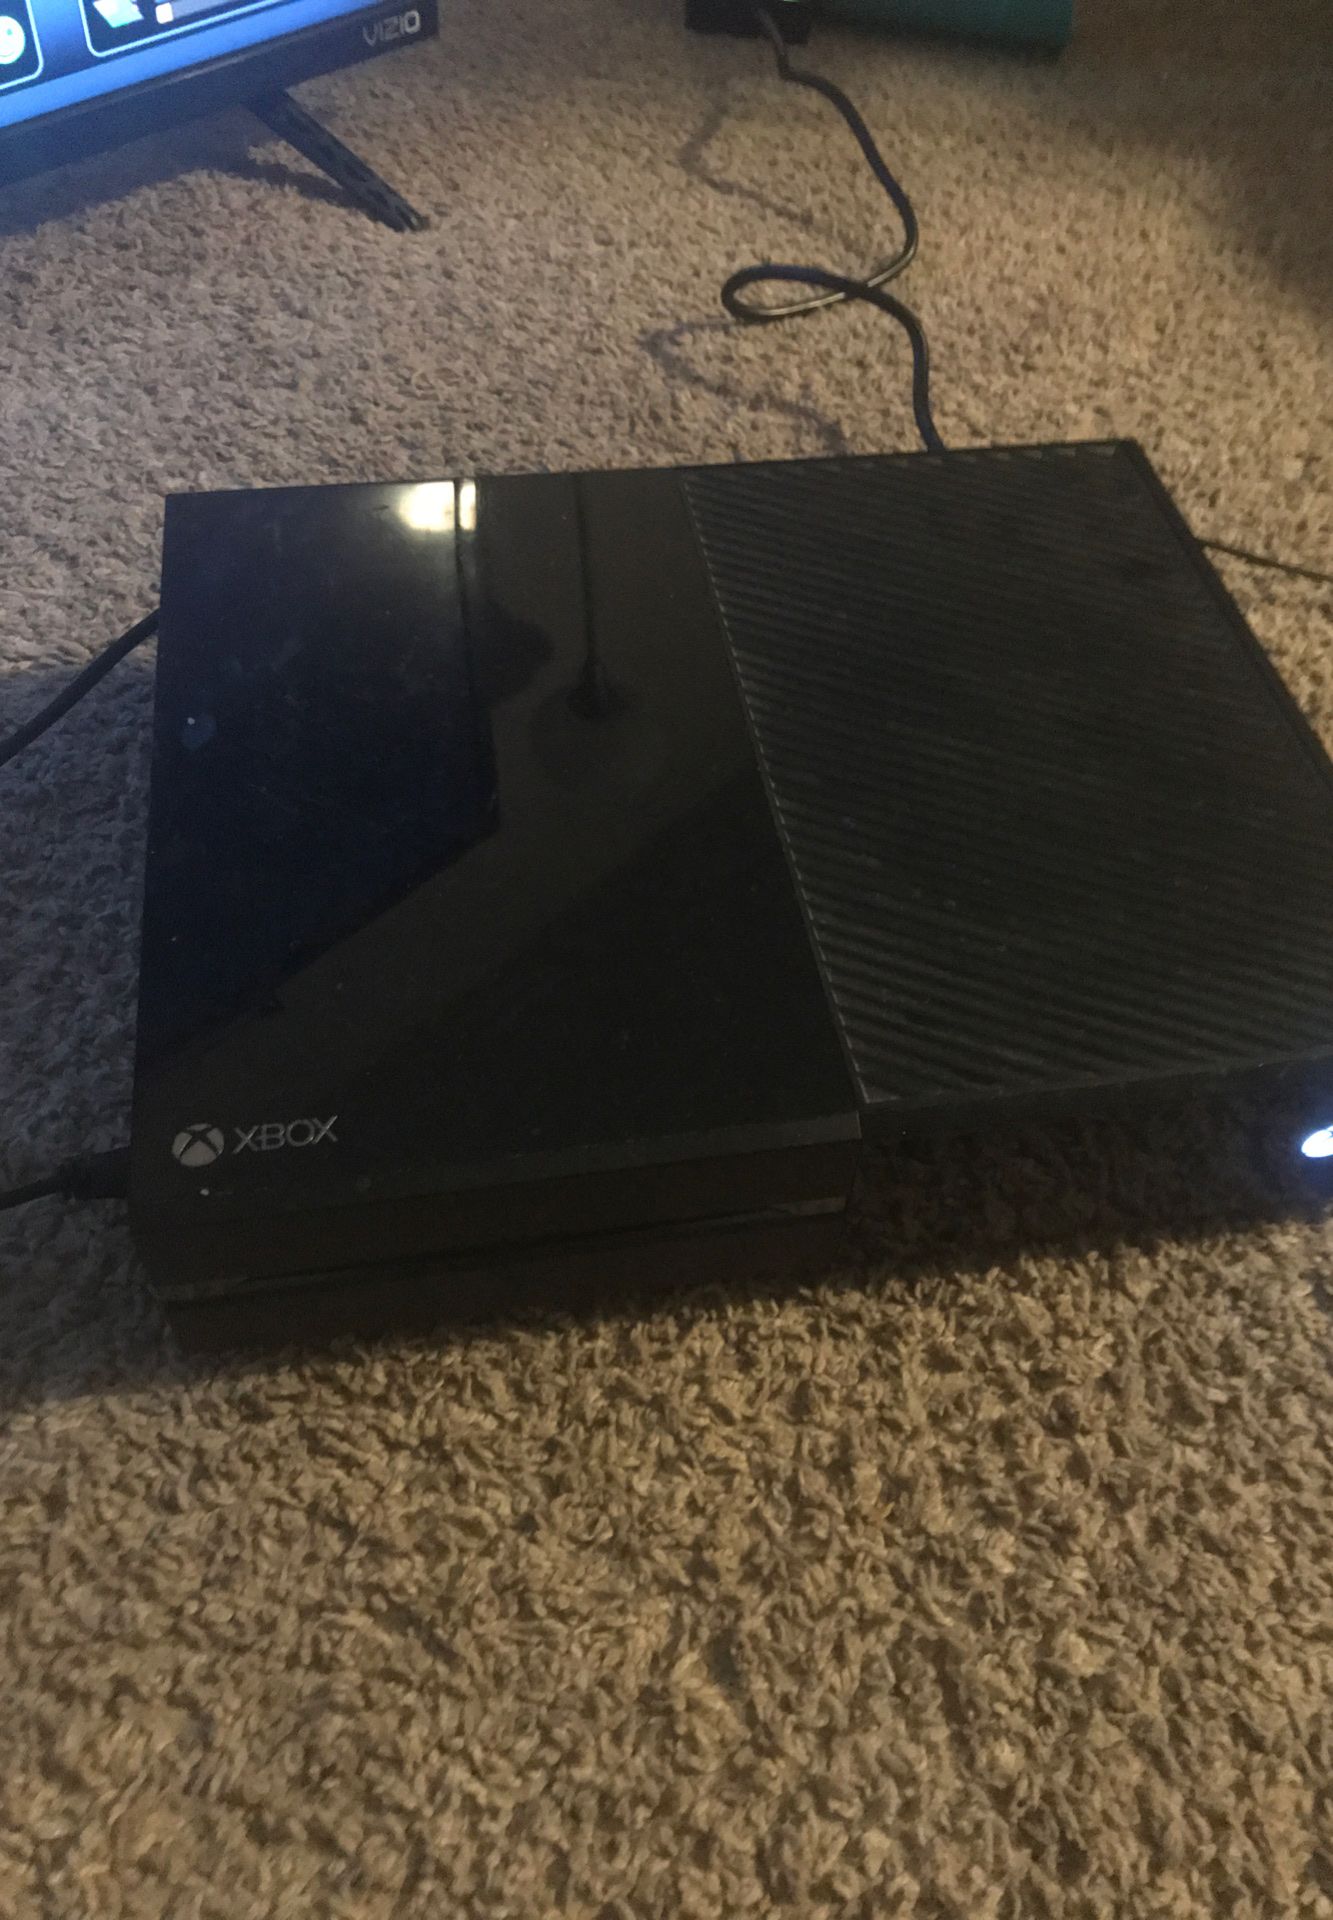 Xbox one with two controller and headset